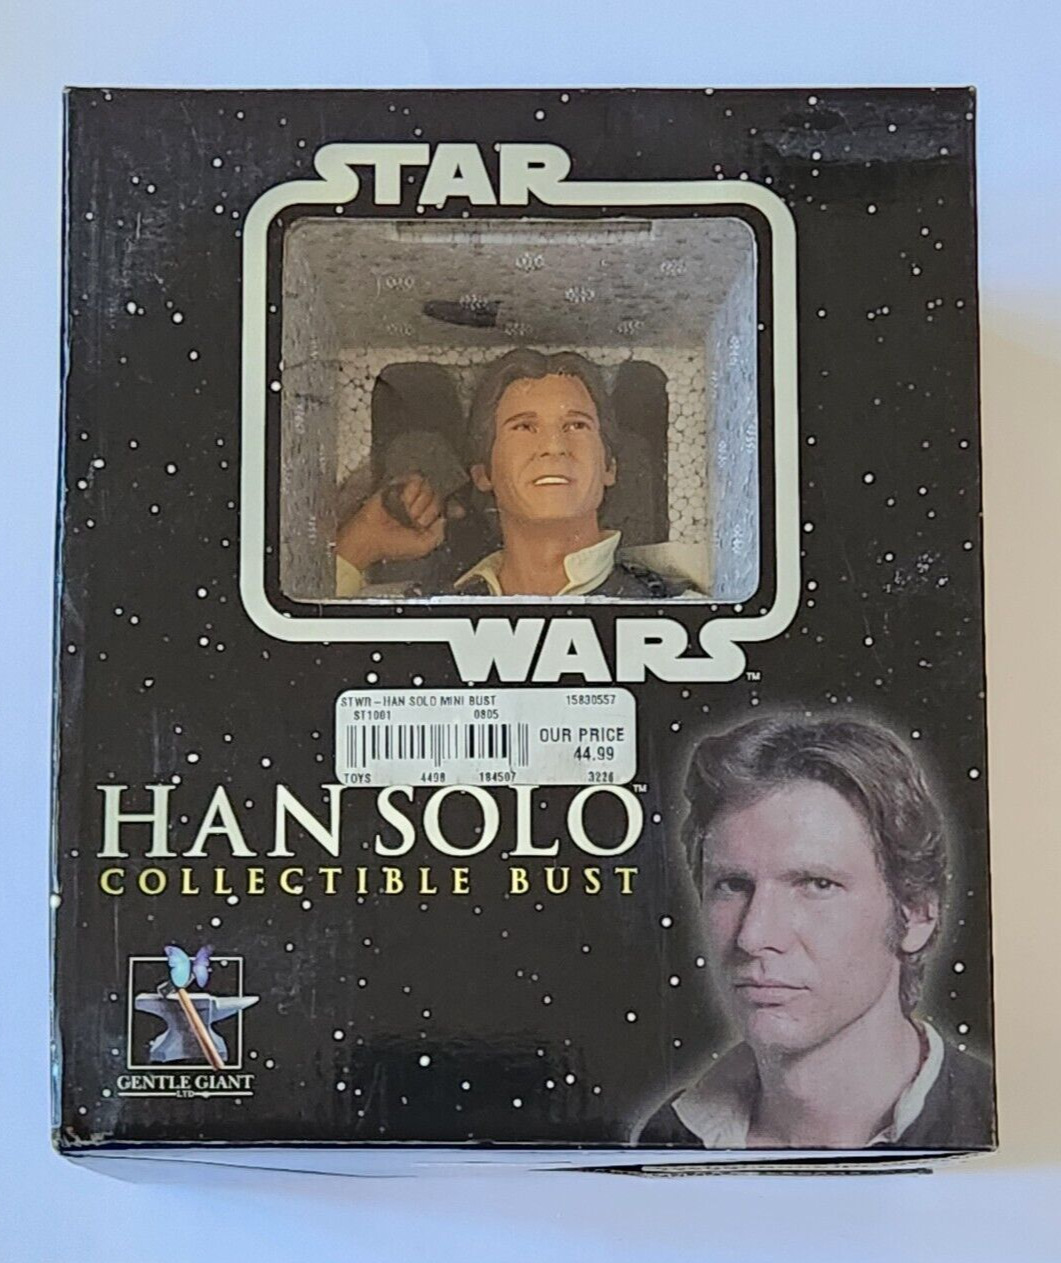 2005 STAR WARS HAN SOLO COLLECTIBLE BUST